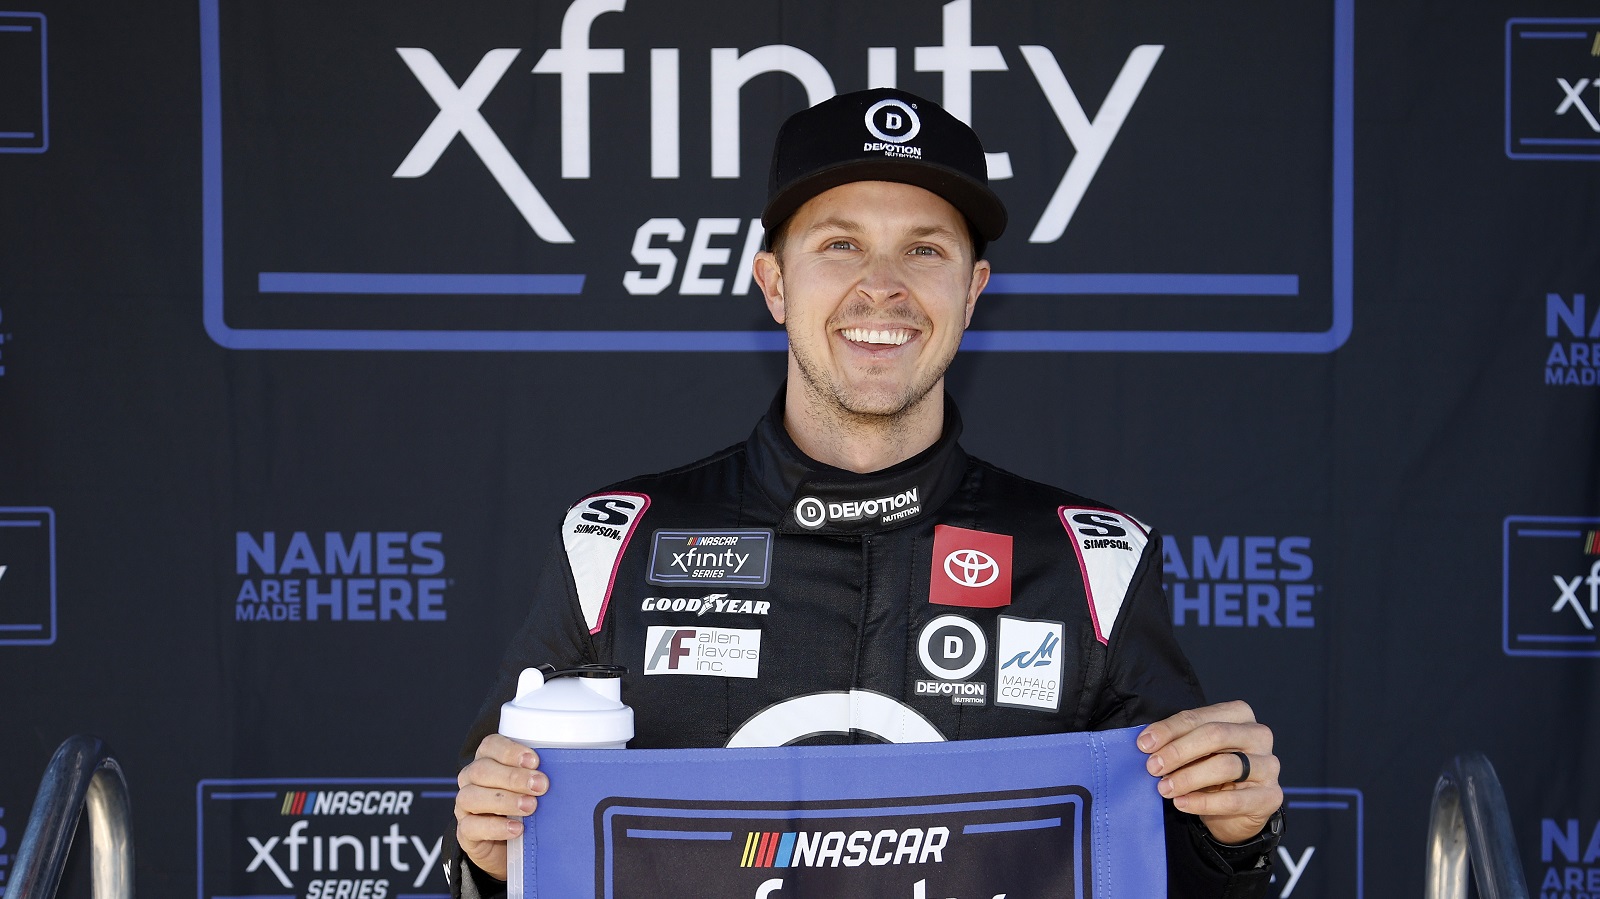 Trevor Bayne, driver of the No. 18 Toyota for Joe Gibbs Racing, poses for photos after winning the pole in qualifying for the NASCAR Xfinity Series United Rentals 200 at Phoenix Raceway on March 12, 2022. | Sean Gardner/Getty Images